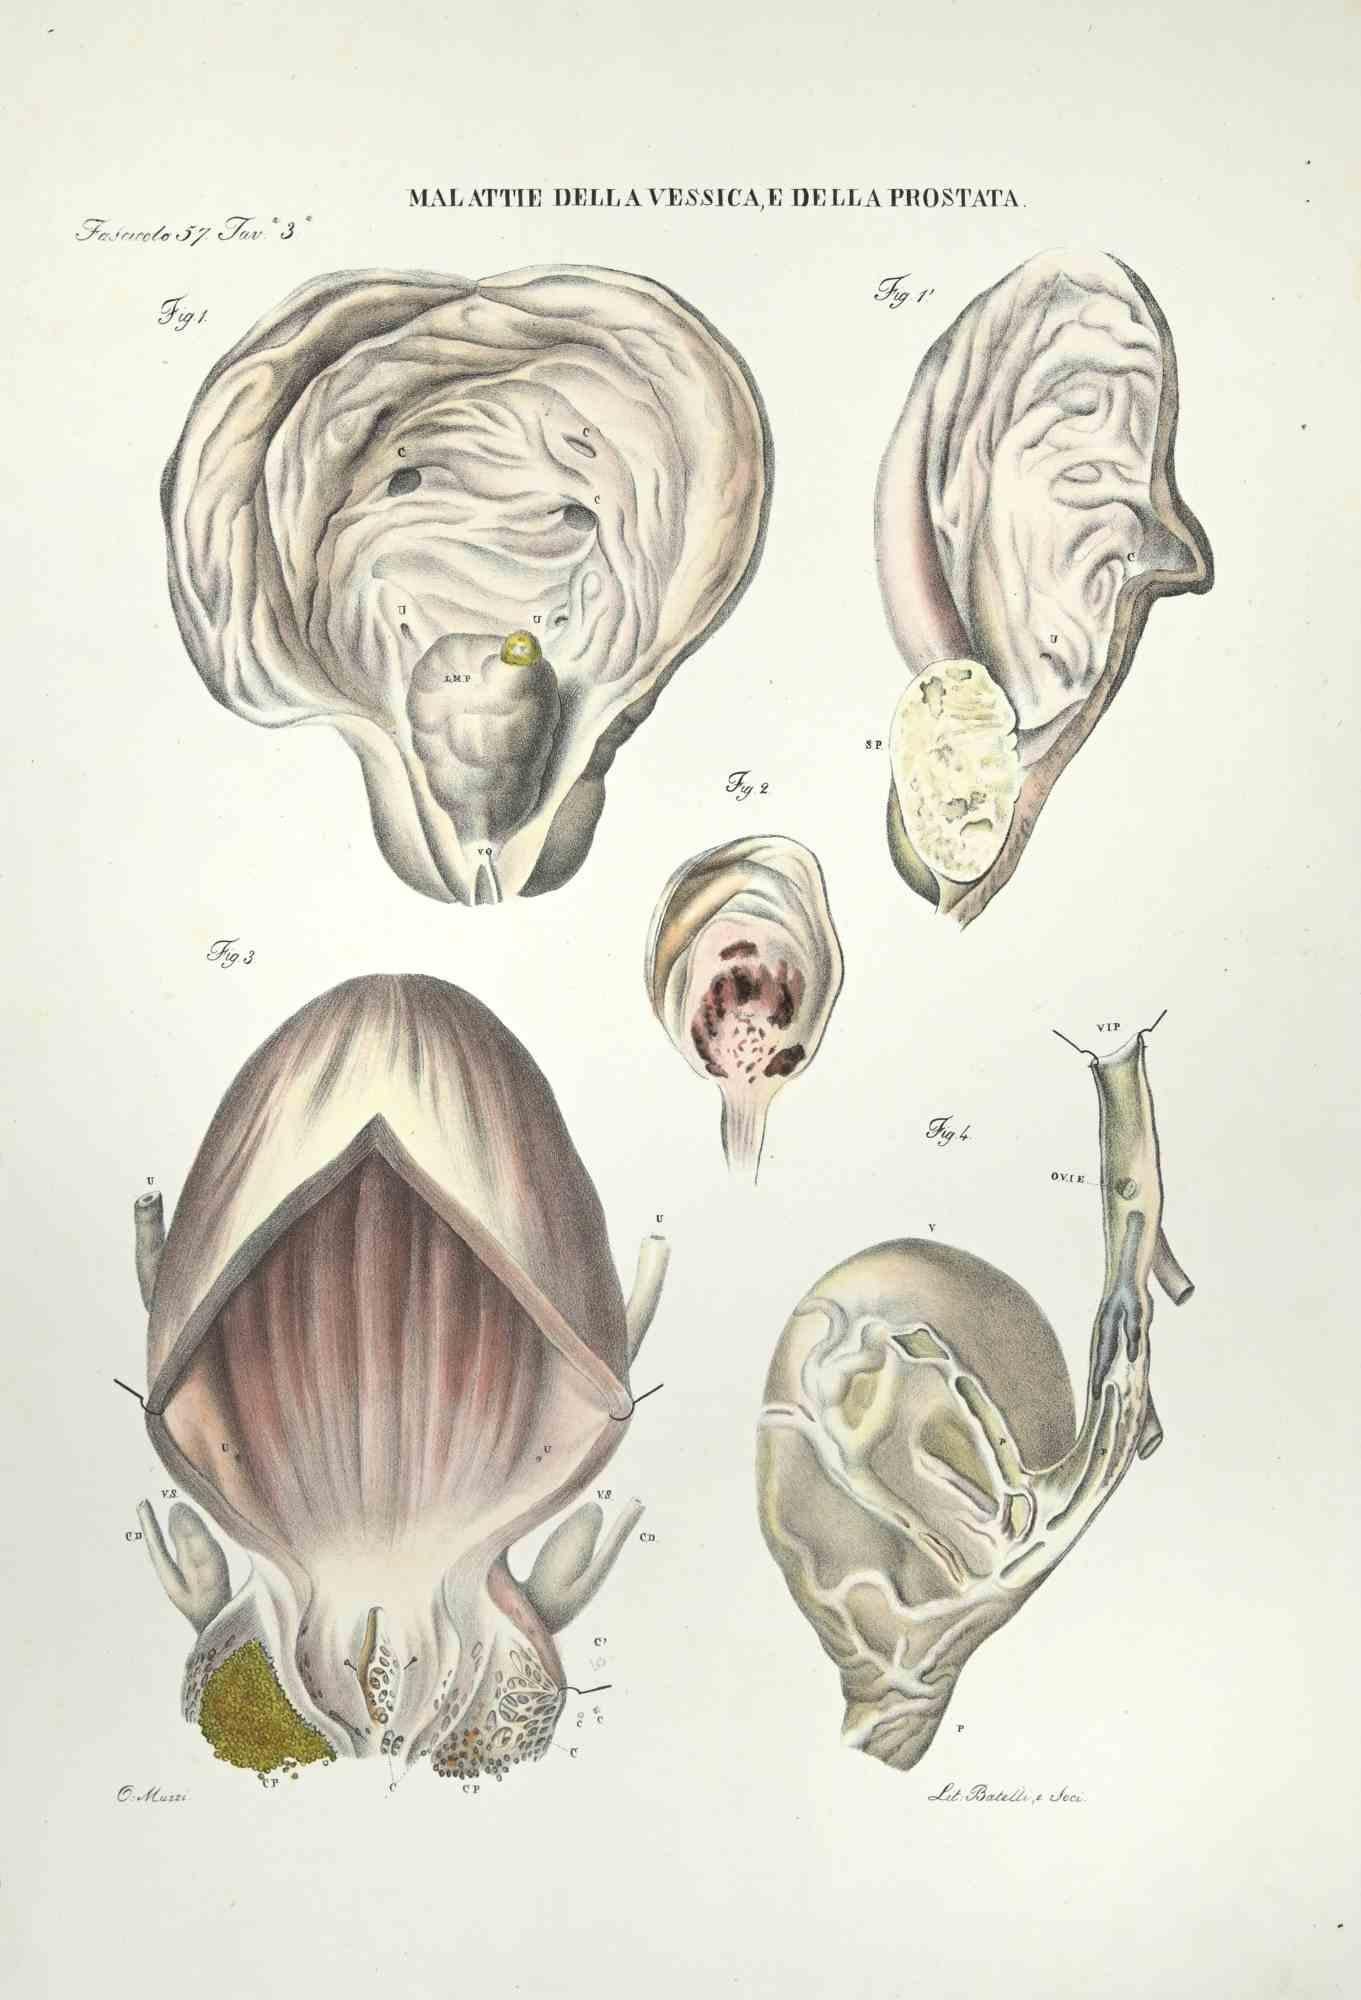 Bladder and Prostate Diseases is a lithograph hand colored by Ottavio Muzzi for the edition of Antoine Chazal,Human Anatomy, Printers Batelli and Ridolfi, realized in 1843.

Signed on plate on the lower left margin.

The artwork belongs to the